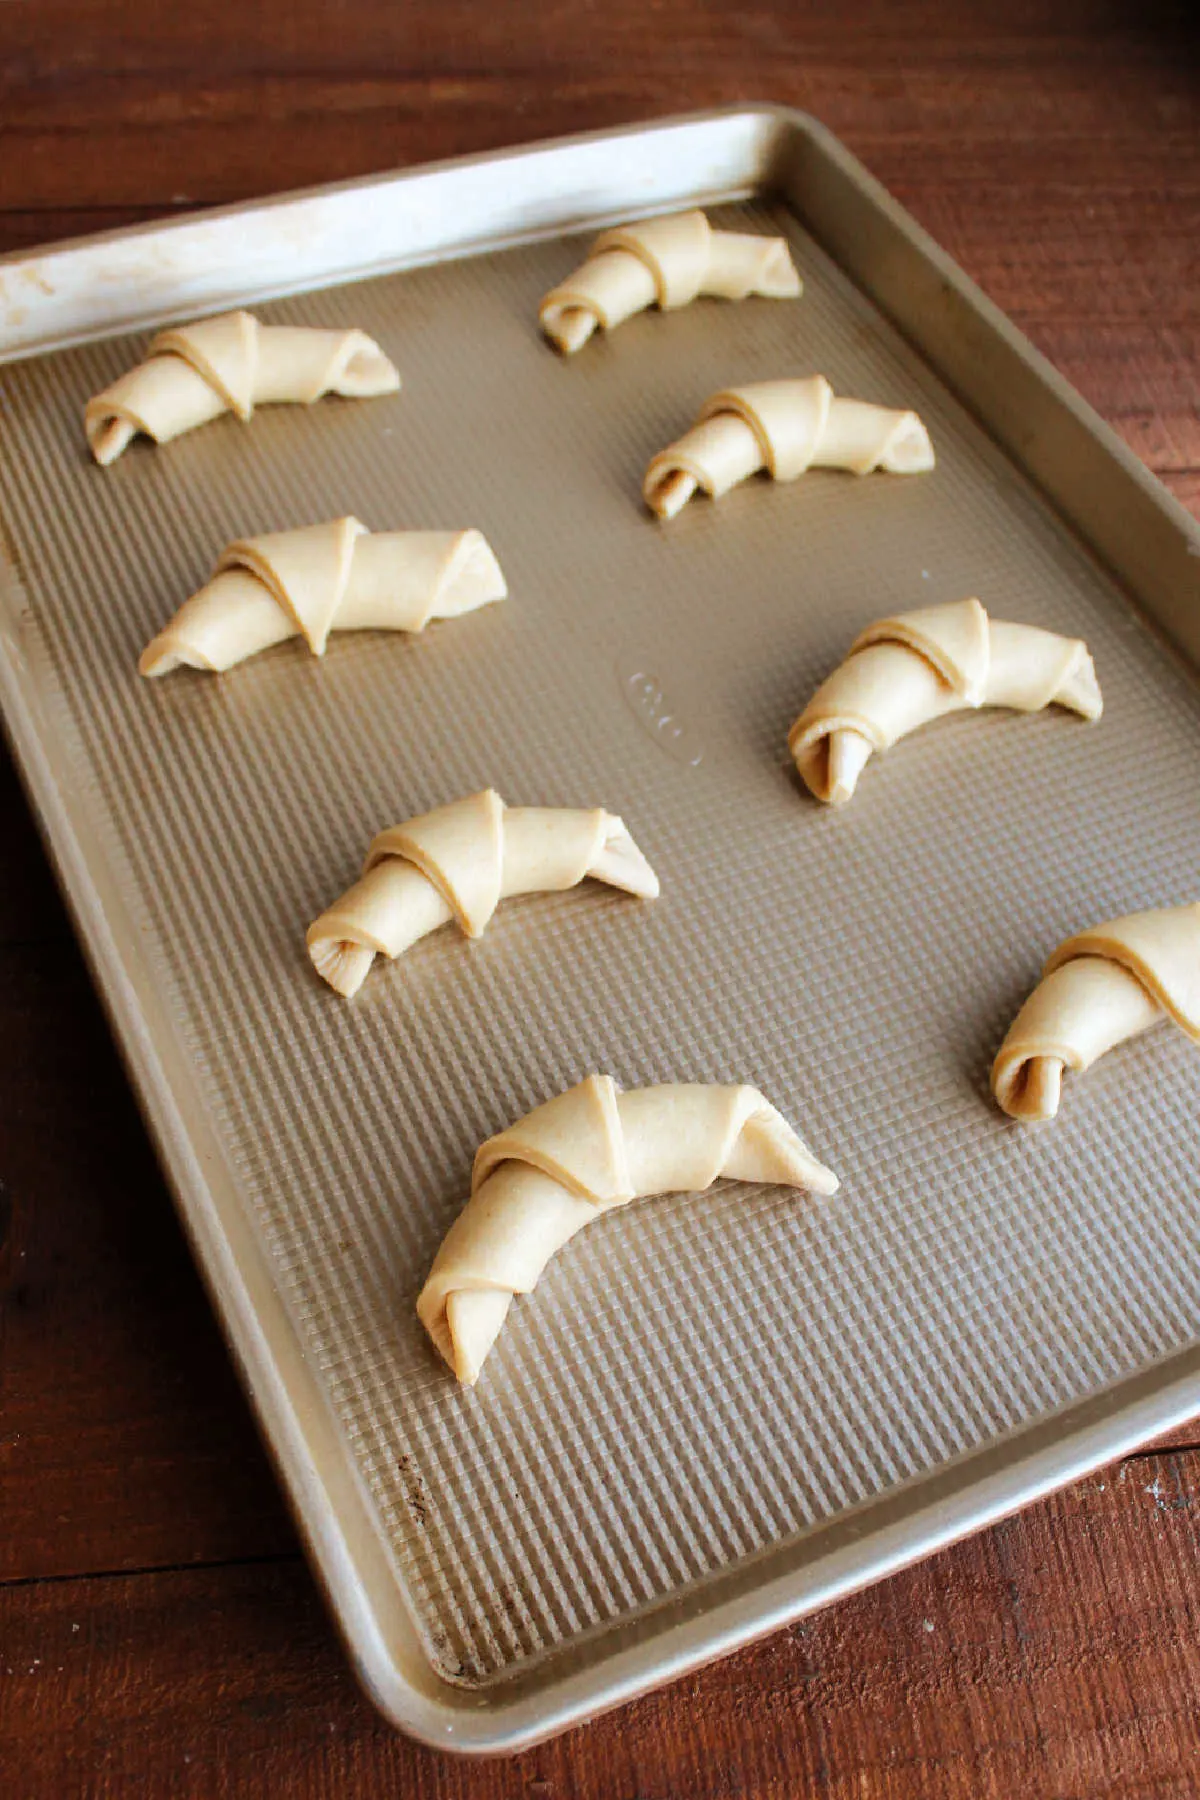 Baking sheet pan of crescent roll dough rolled into horns and ready to proof.